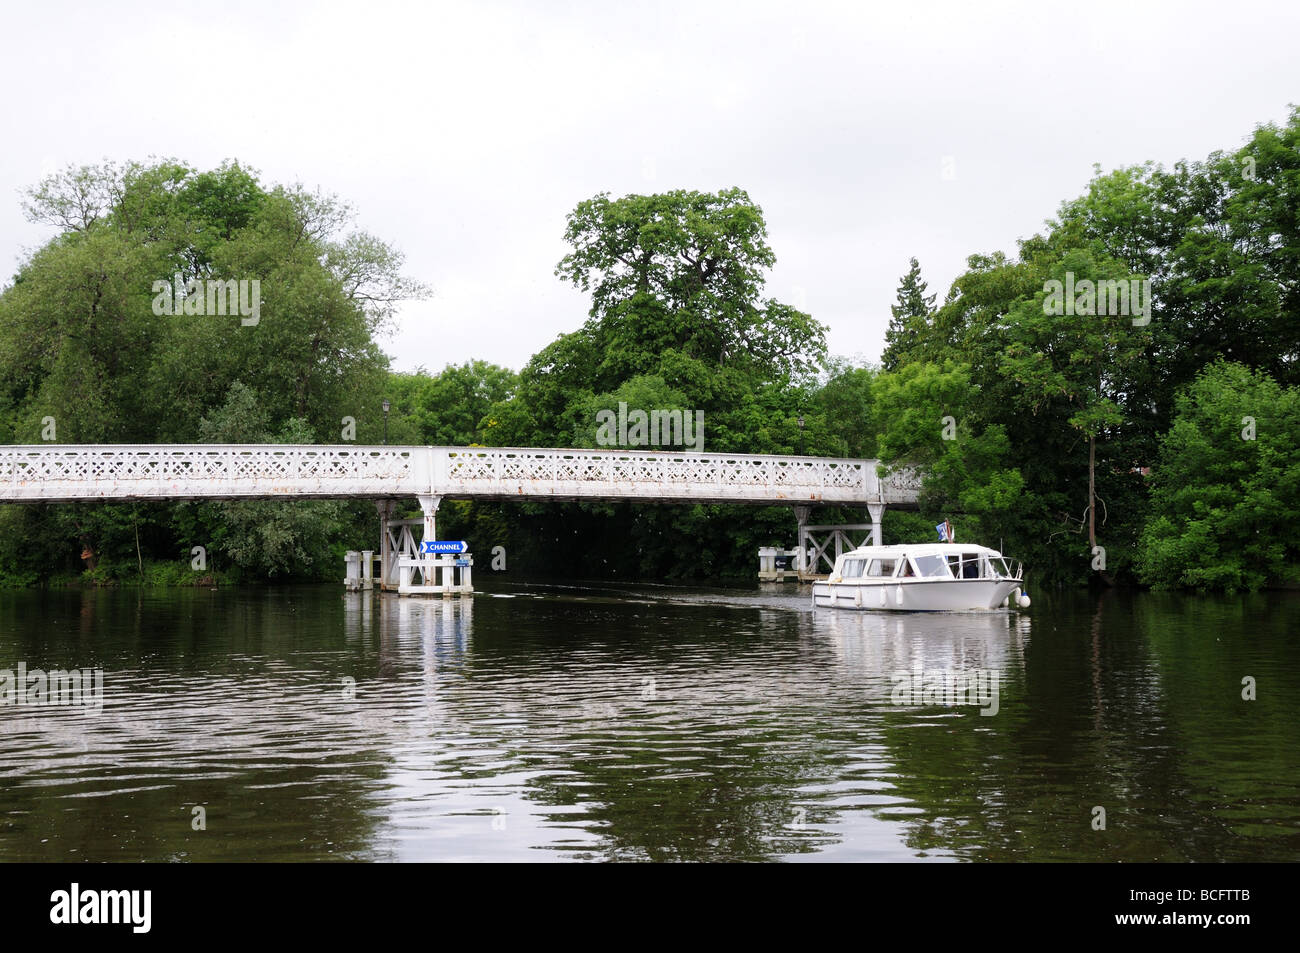 Whitfchurch Toll Bridge over the River Thames Pangbourne West Berkshire England Stock Photo